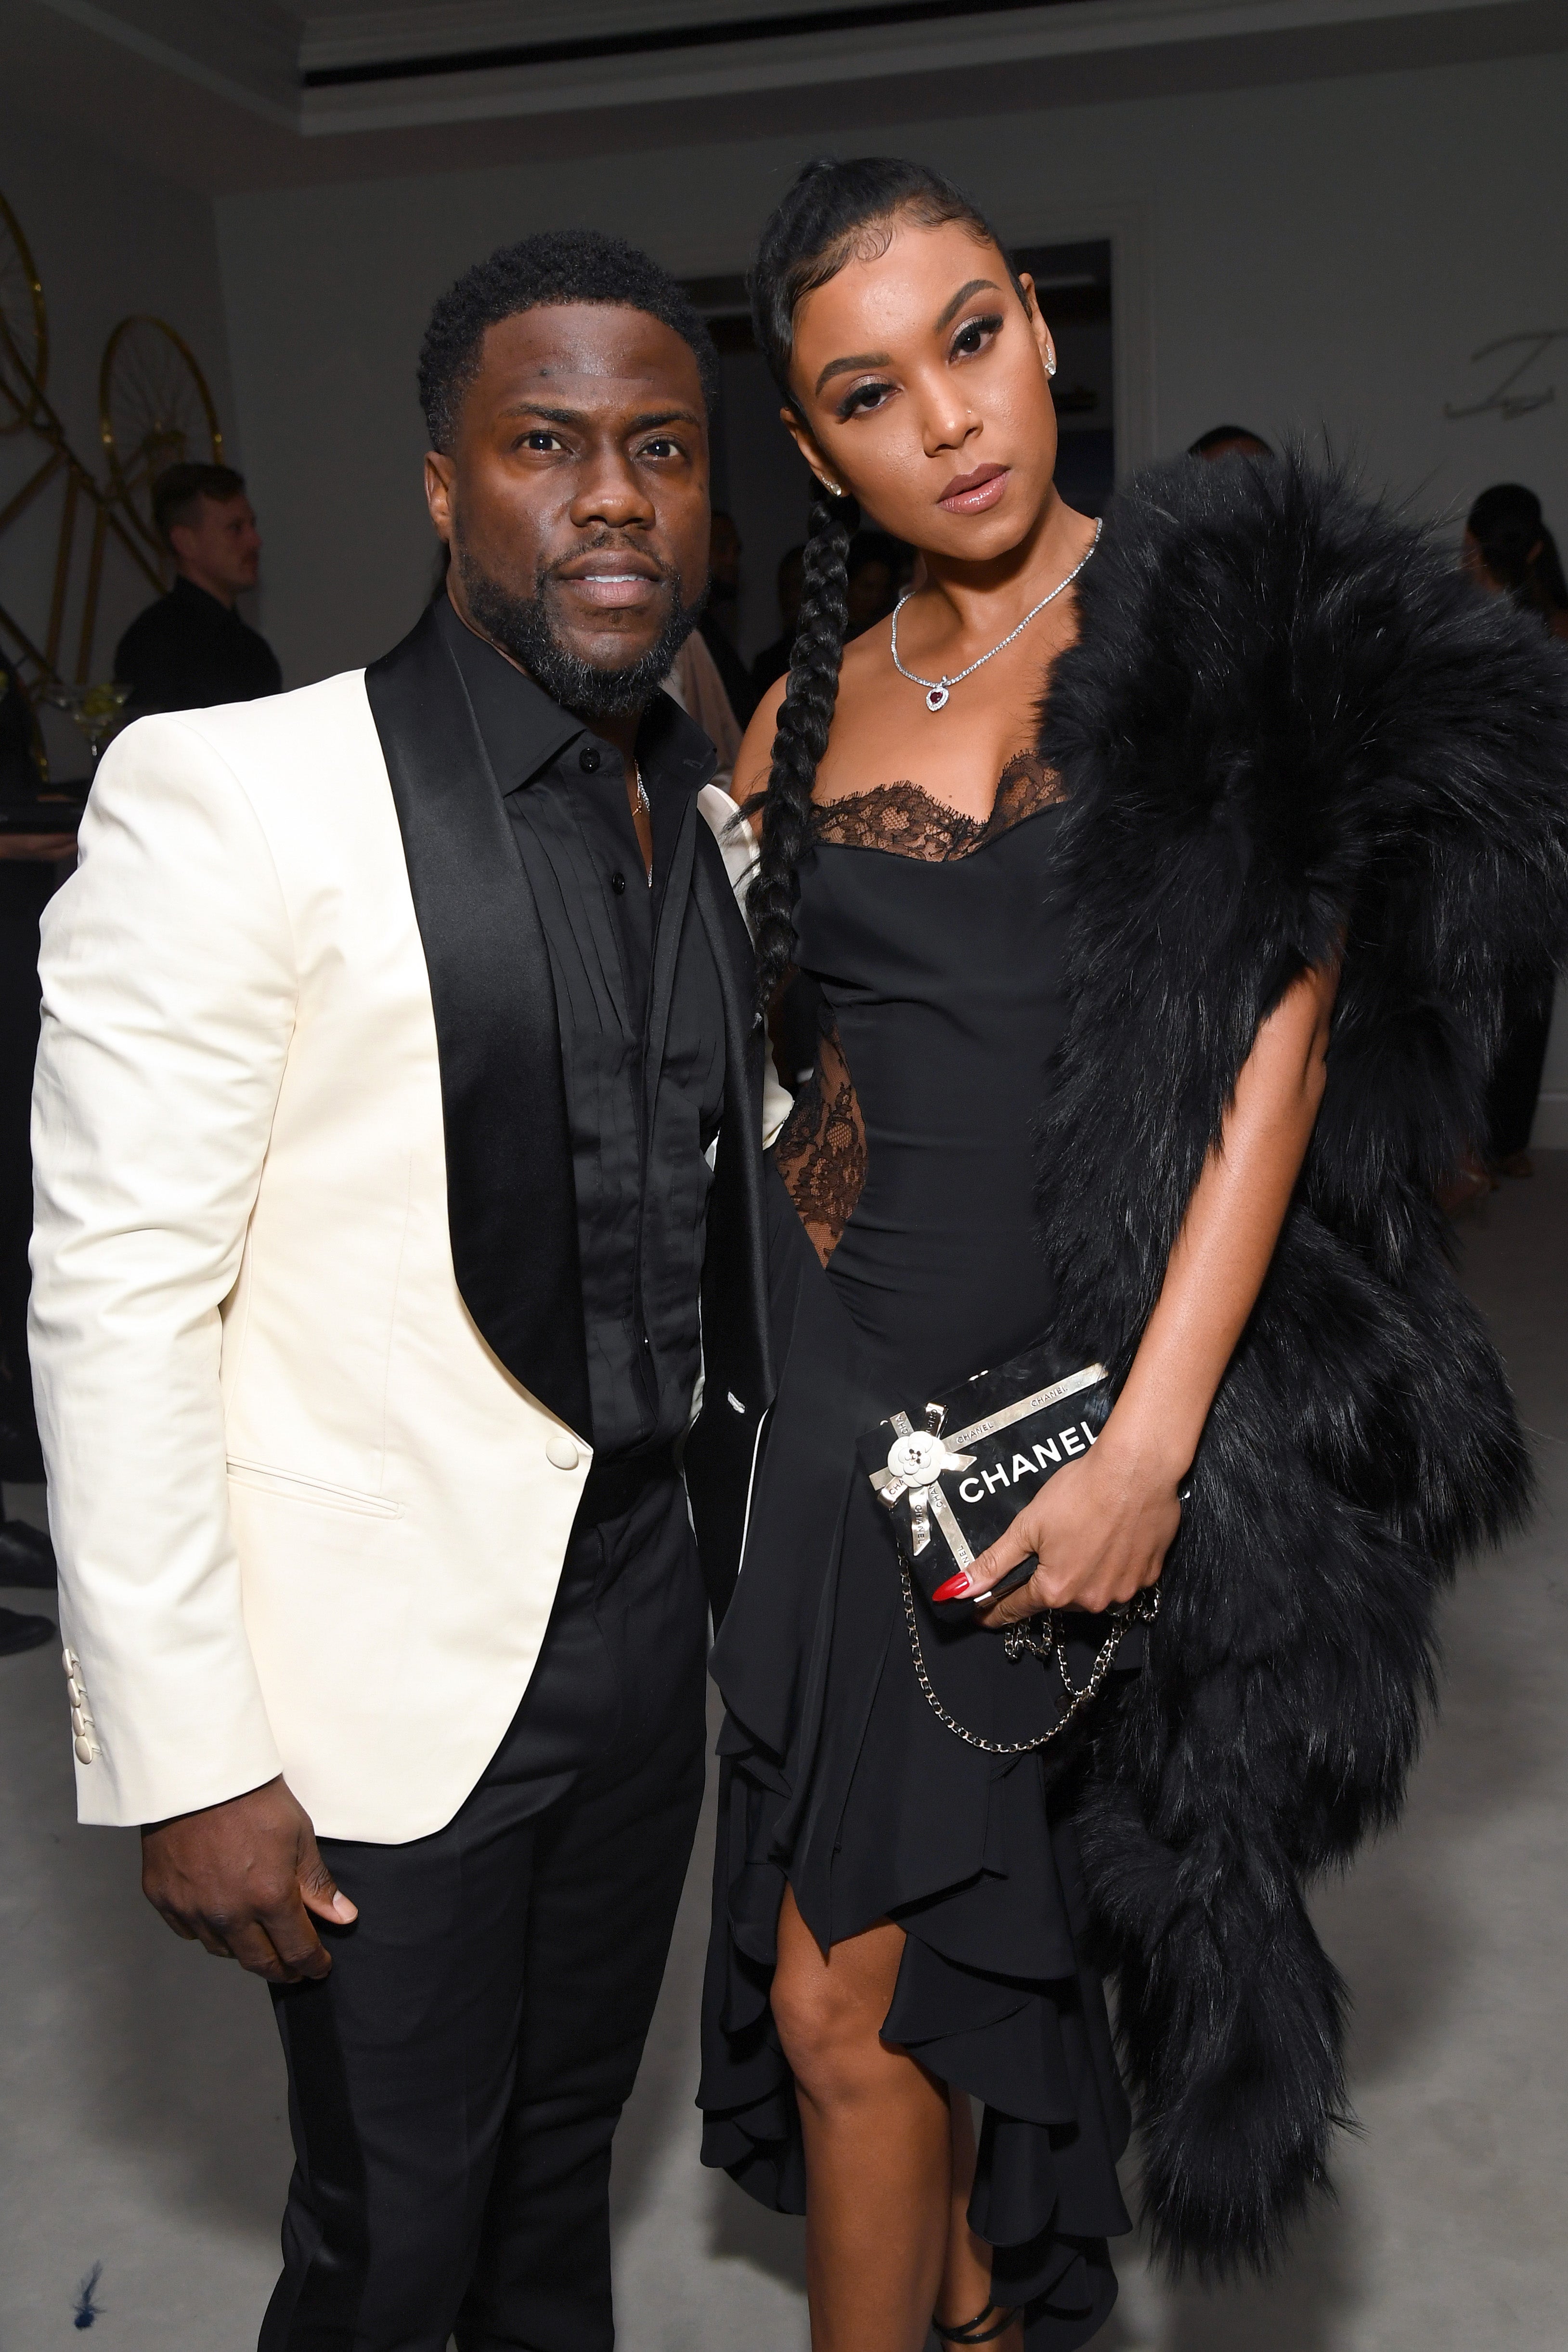 The Best Fashion Moments From #Diddy50